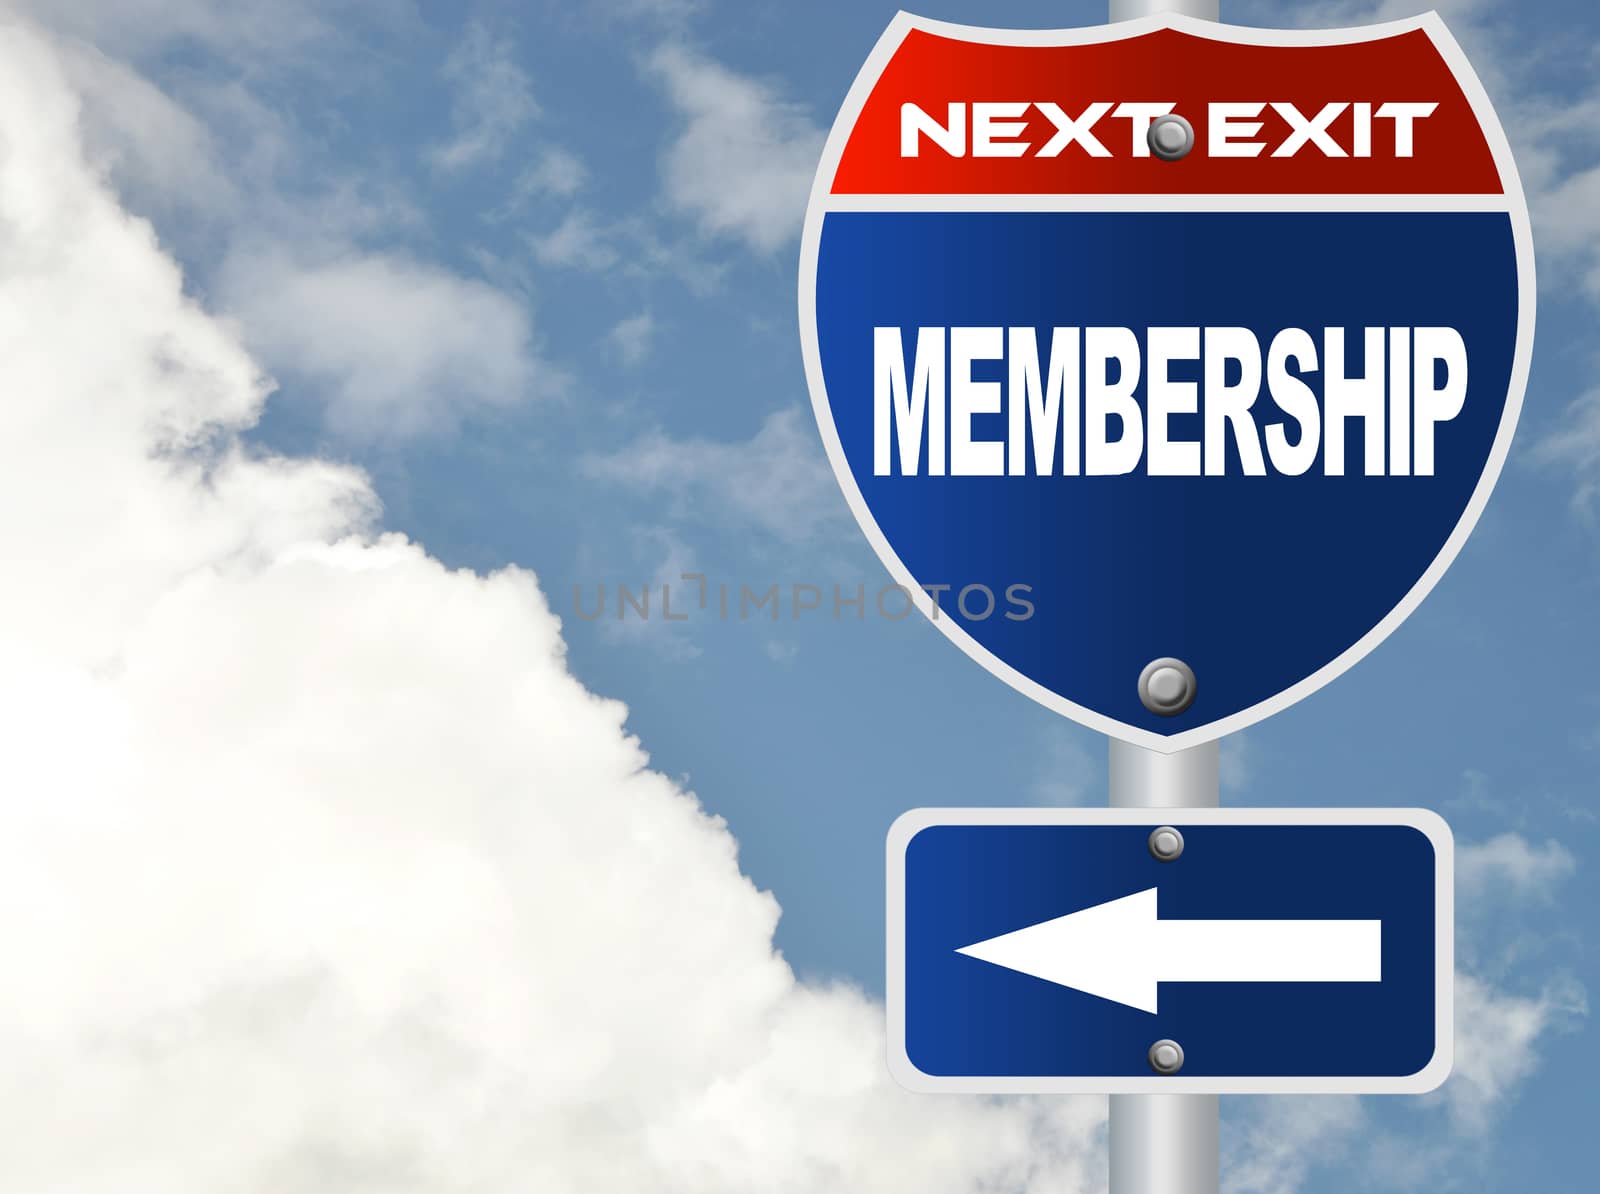 Membership road sign by payphoto